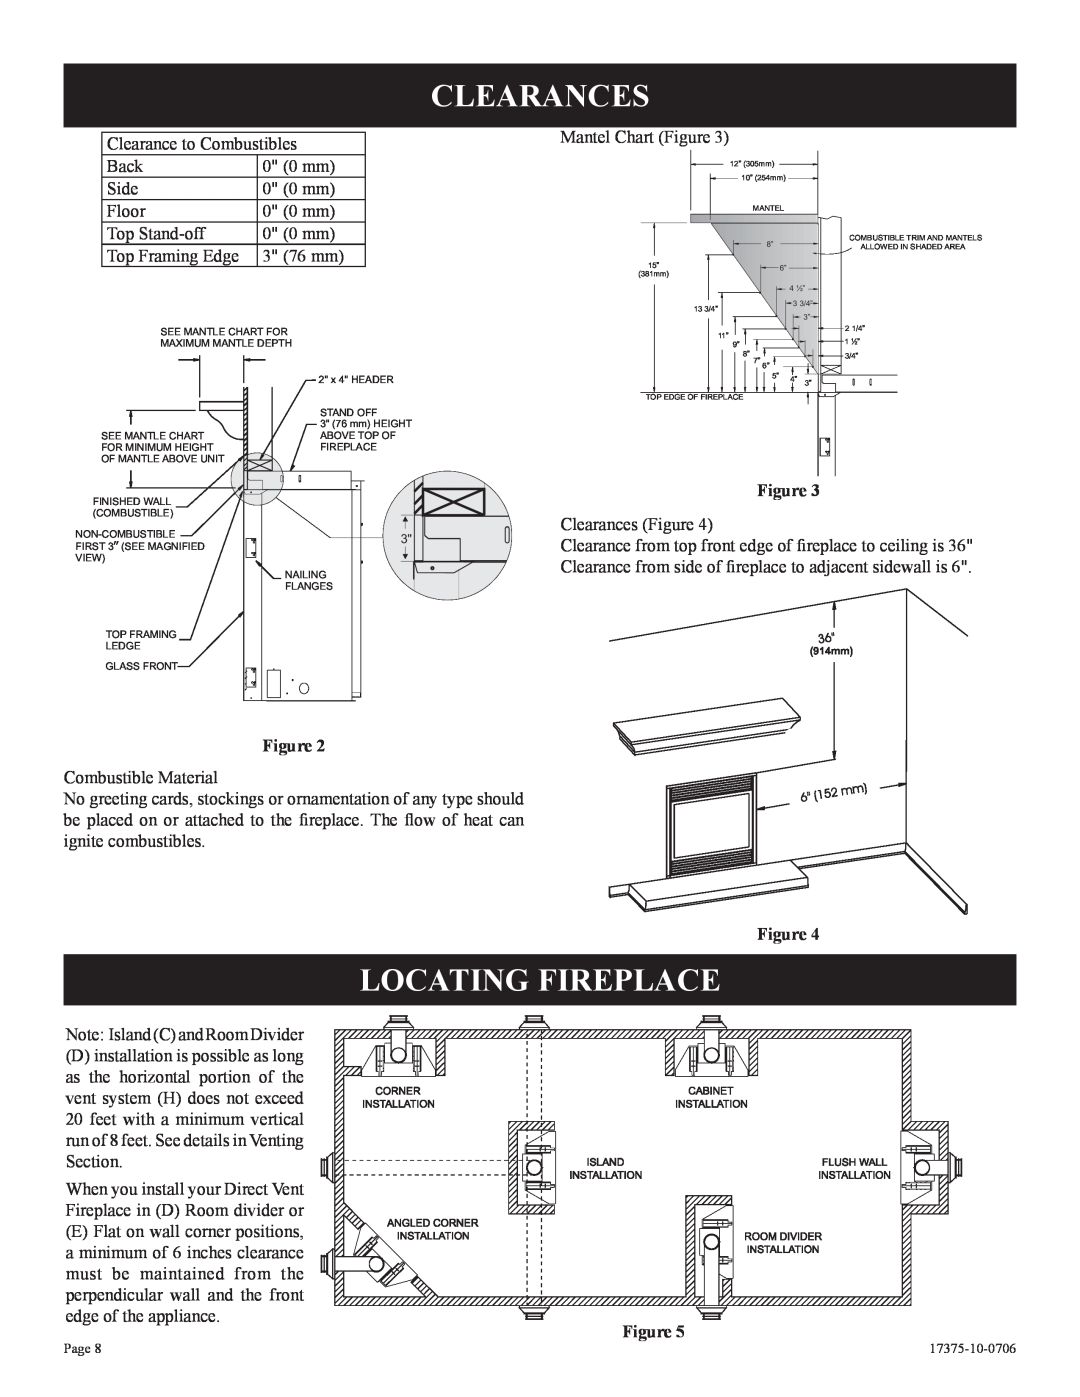 Empire Comfort Systems DVP42FP9(1,3)(N,P)-1, DVP48FP3(0,1,2,3)(N,P)-1, DVP48FP9(1,3)(N,P)-1 Clearances, Locating Fireplace 